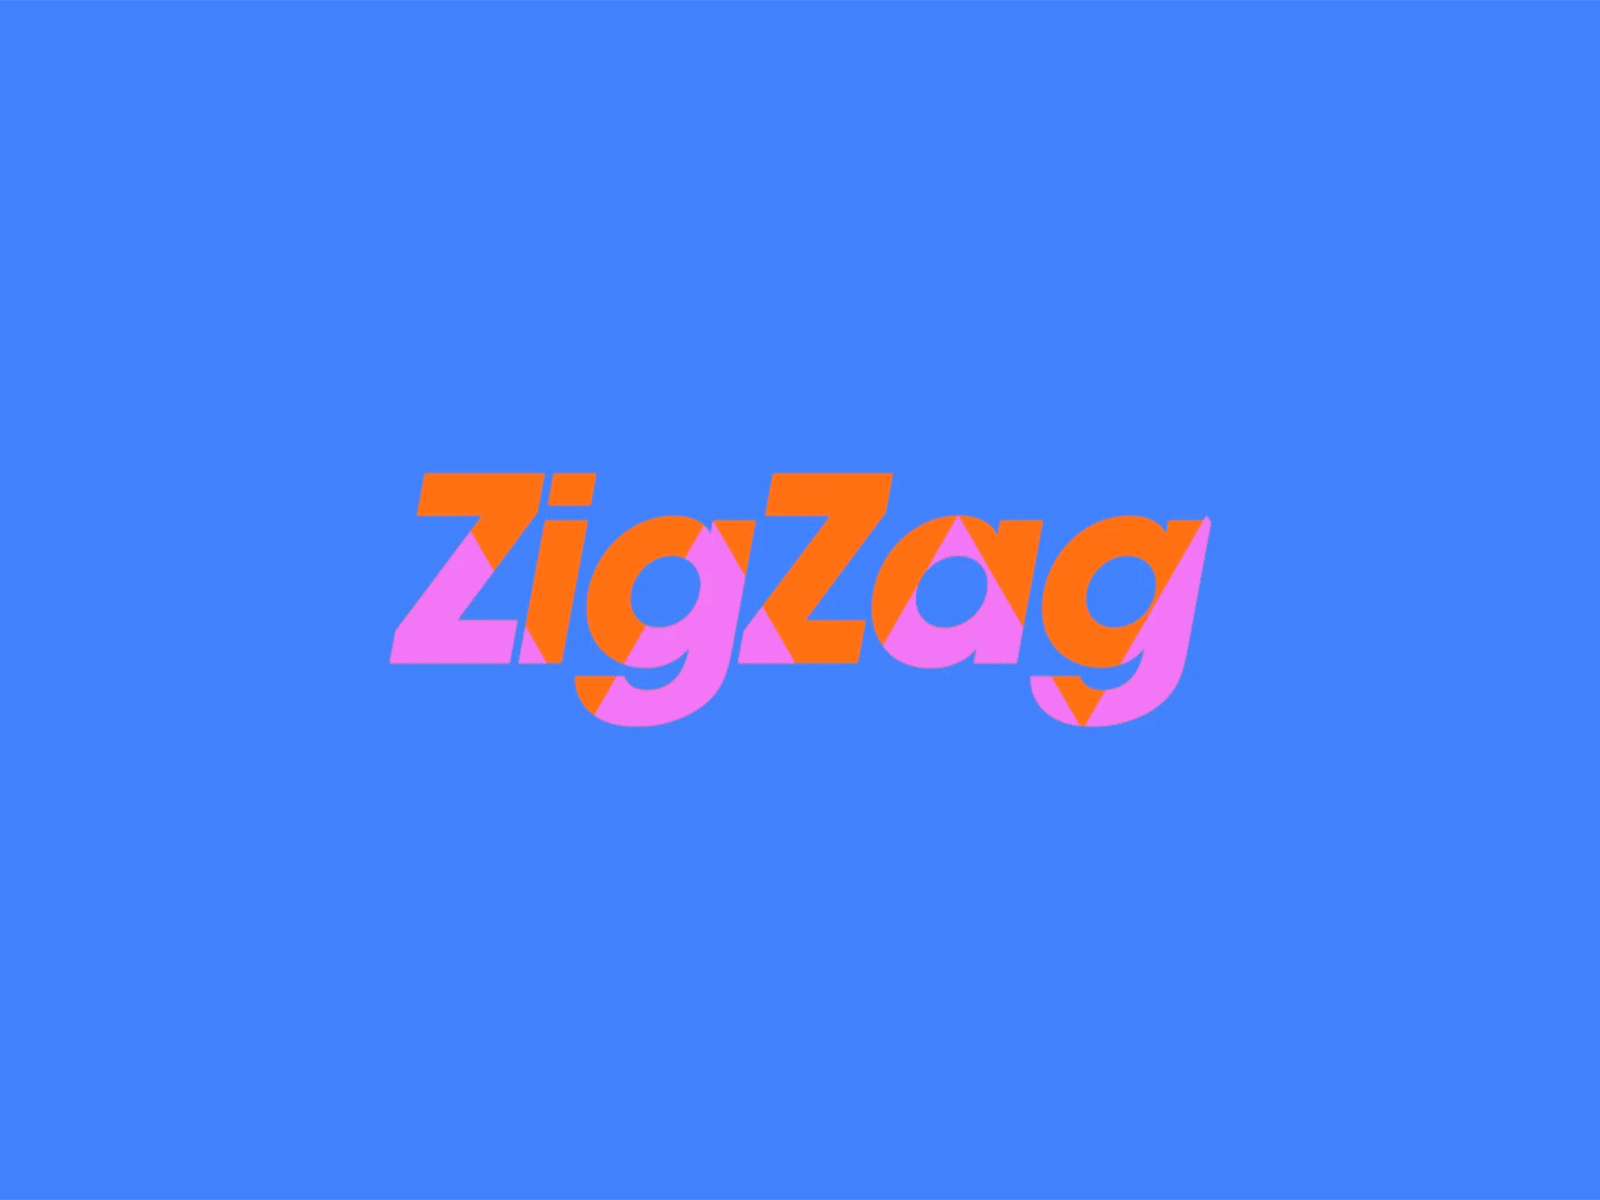 ZigZag animation by Laura Martin on Dribbble